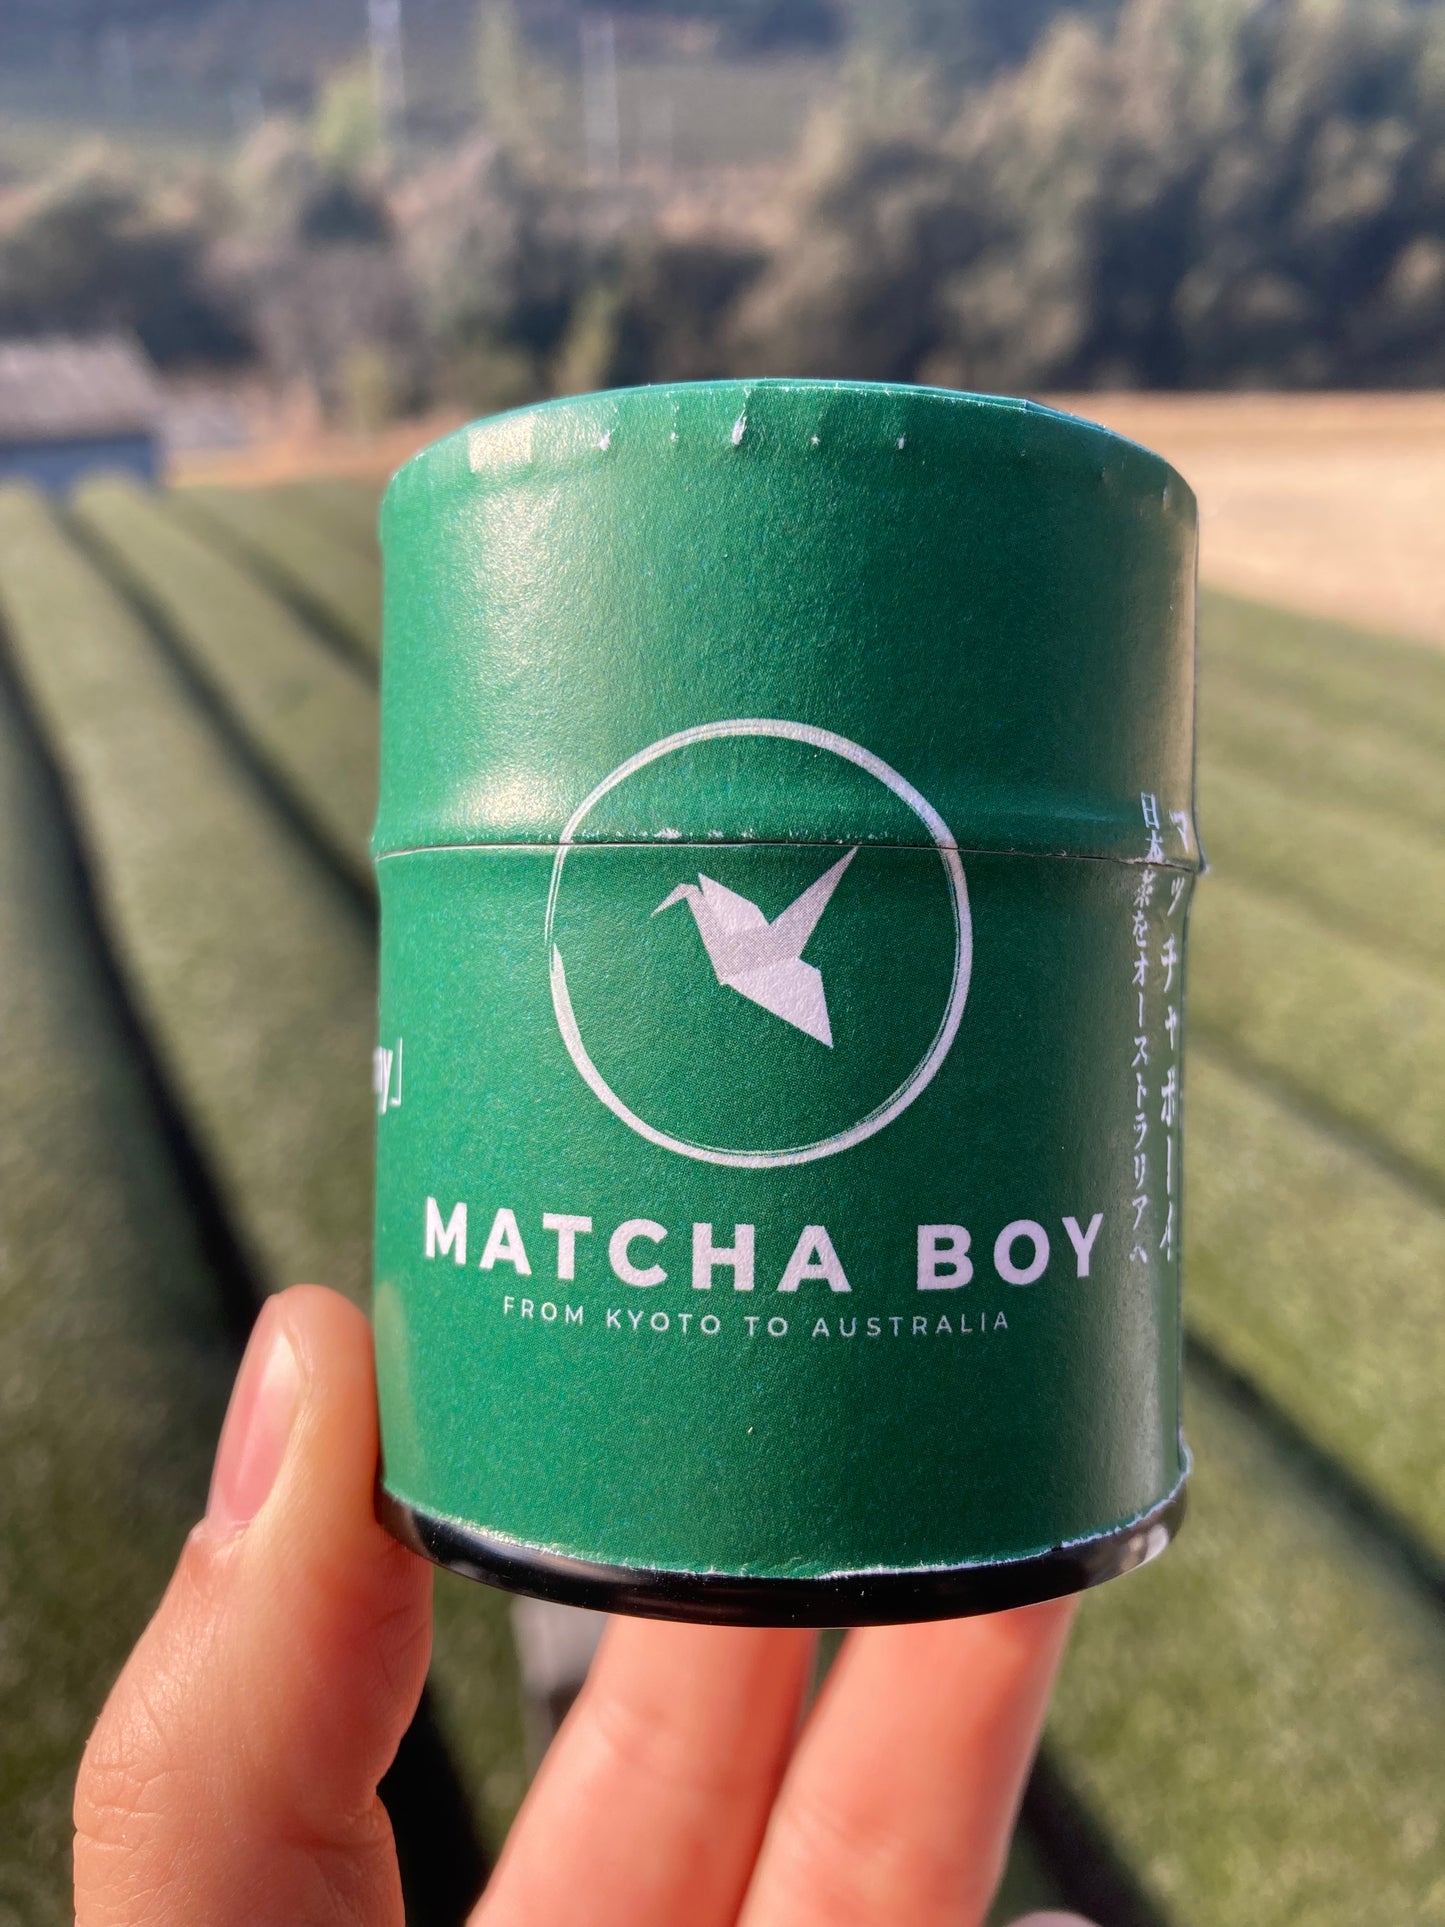 Can of ceremonial matcha